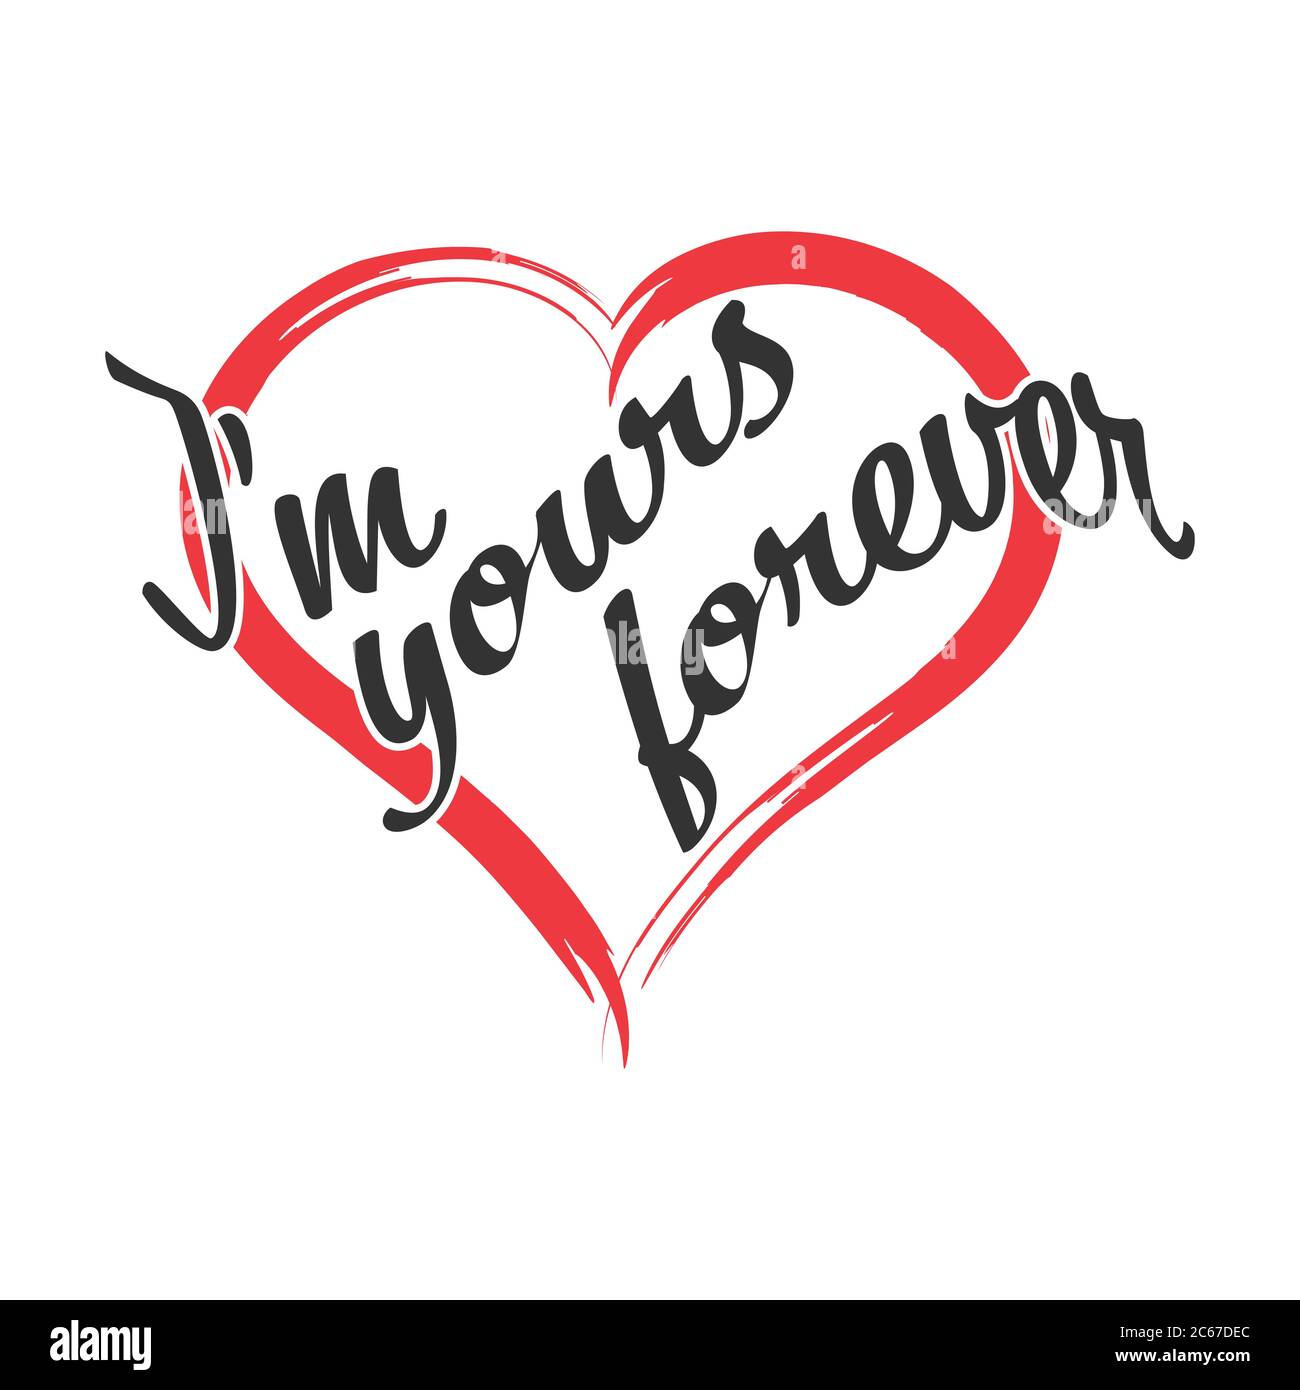 Yours forever Stock Vector Images - Alamy